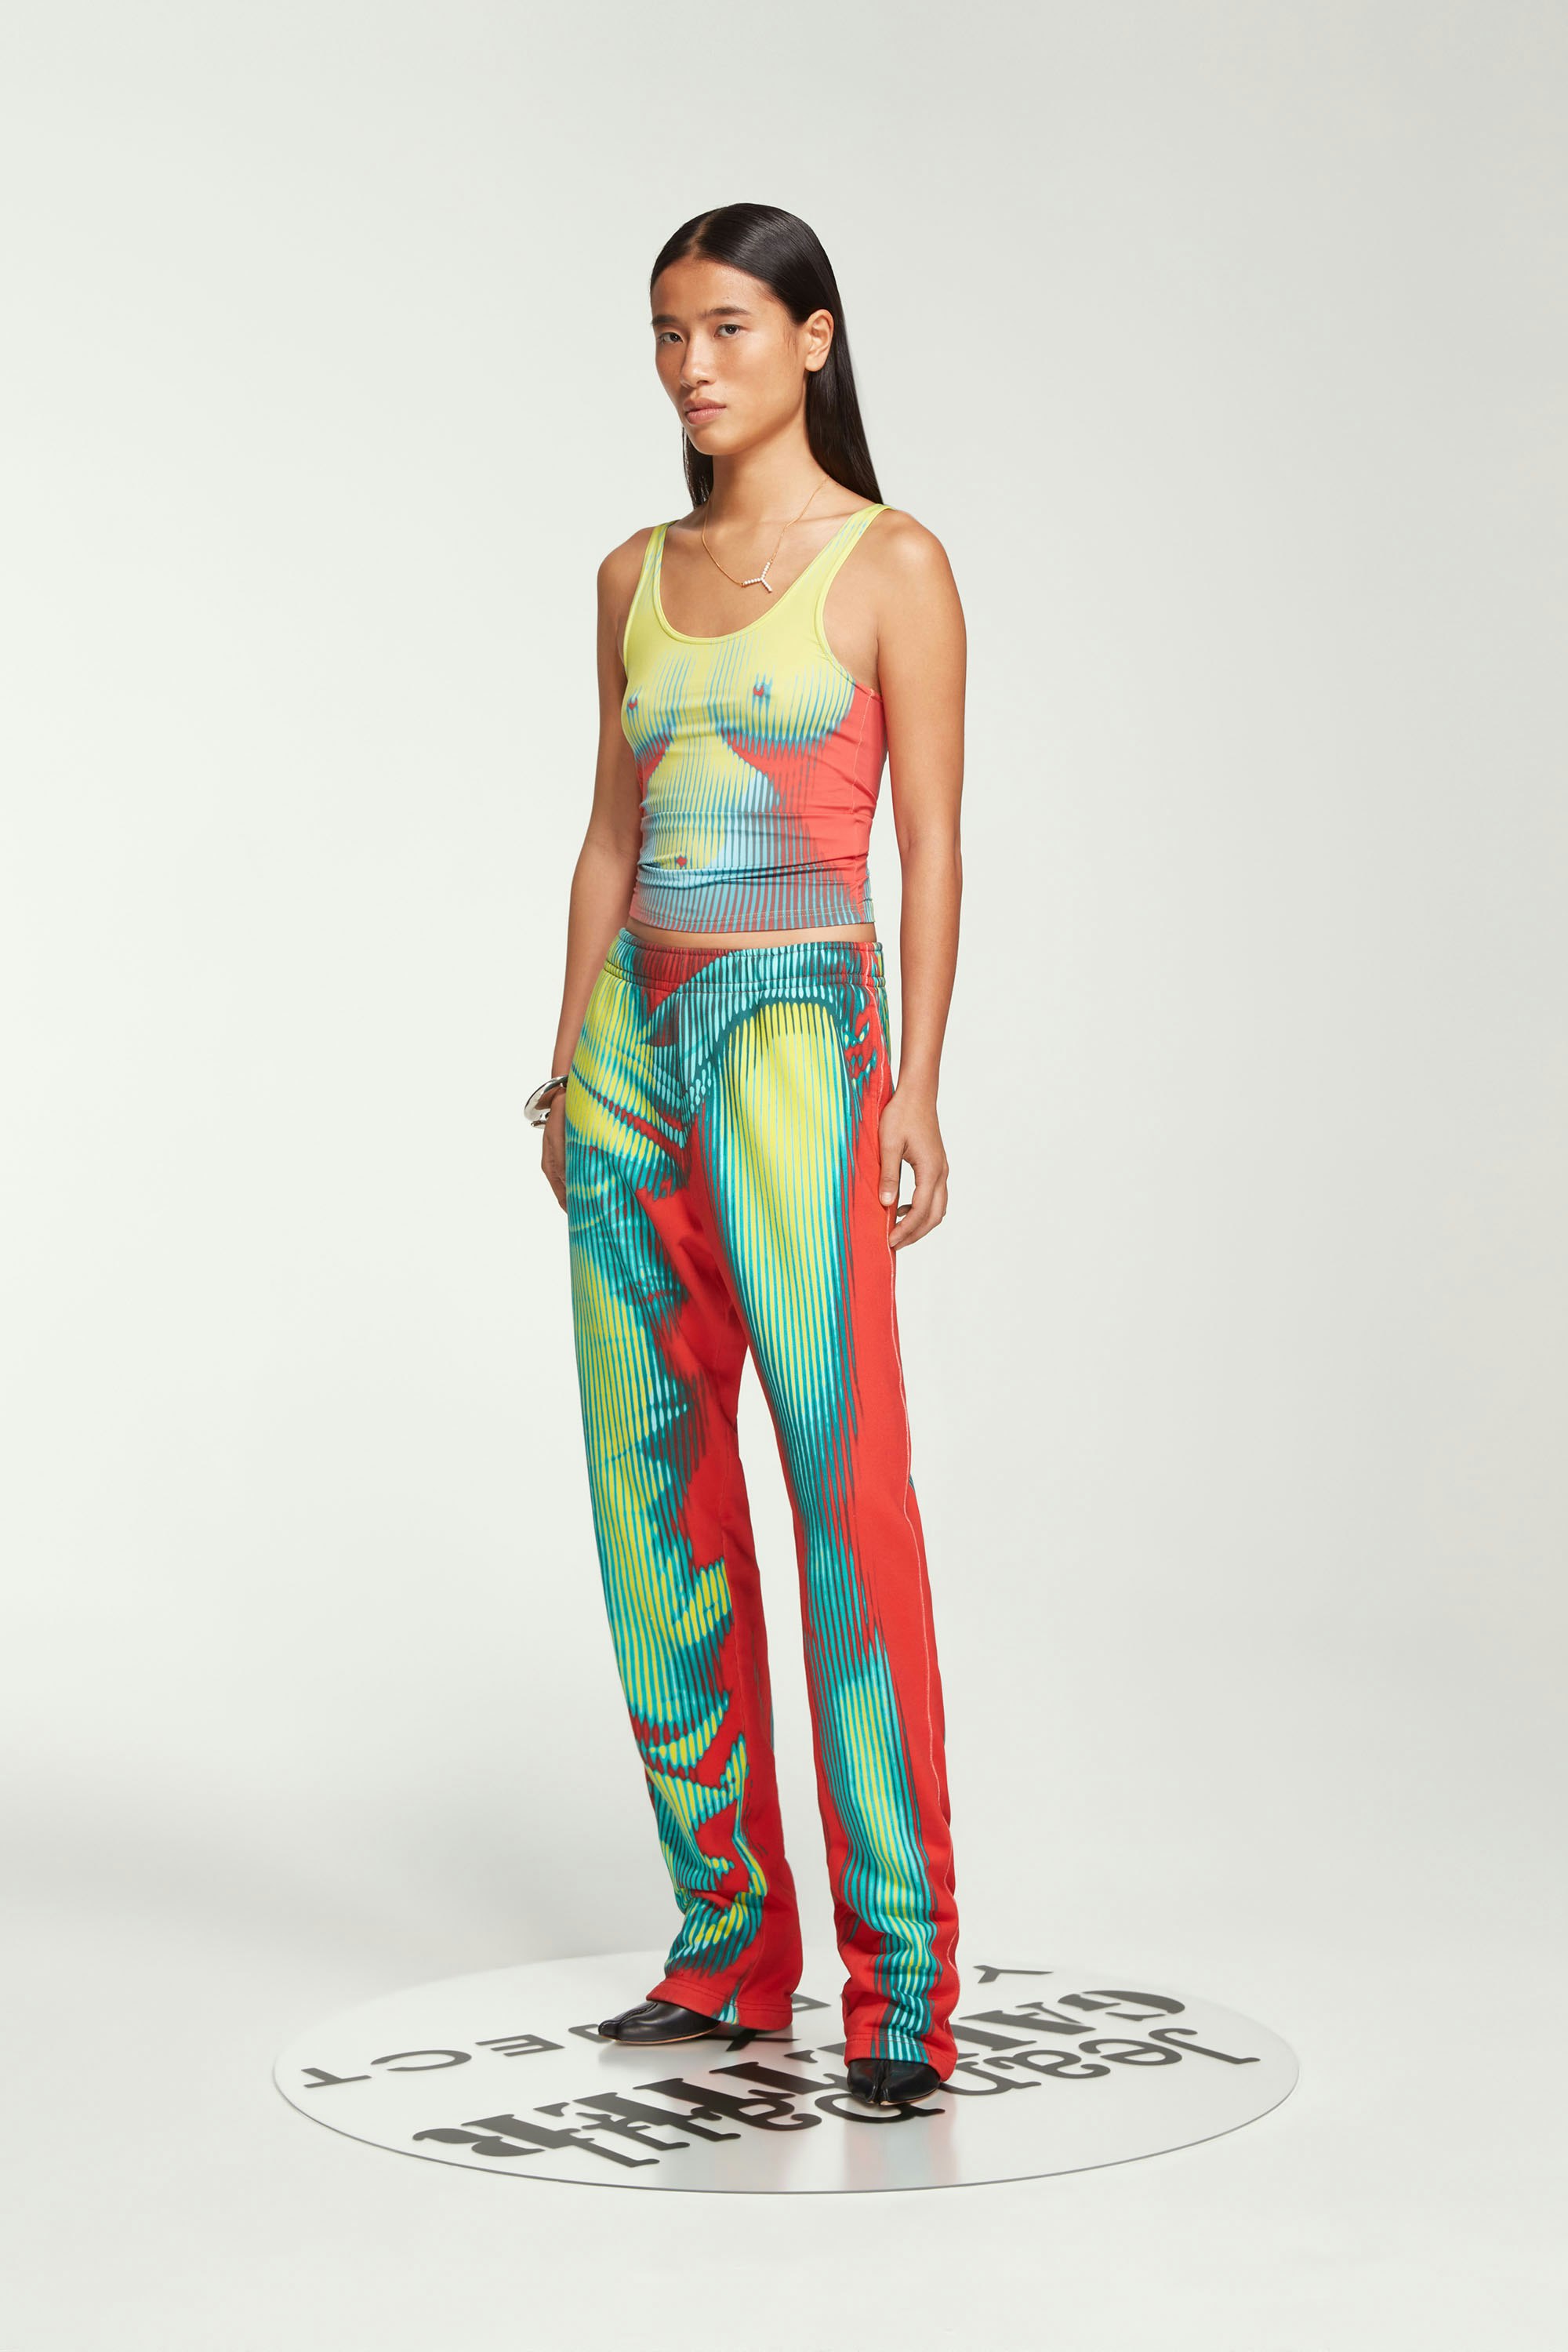 The Green & Red Body Morph Sweatpants by Jean Paul Gaultier x Y/Project